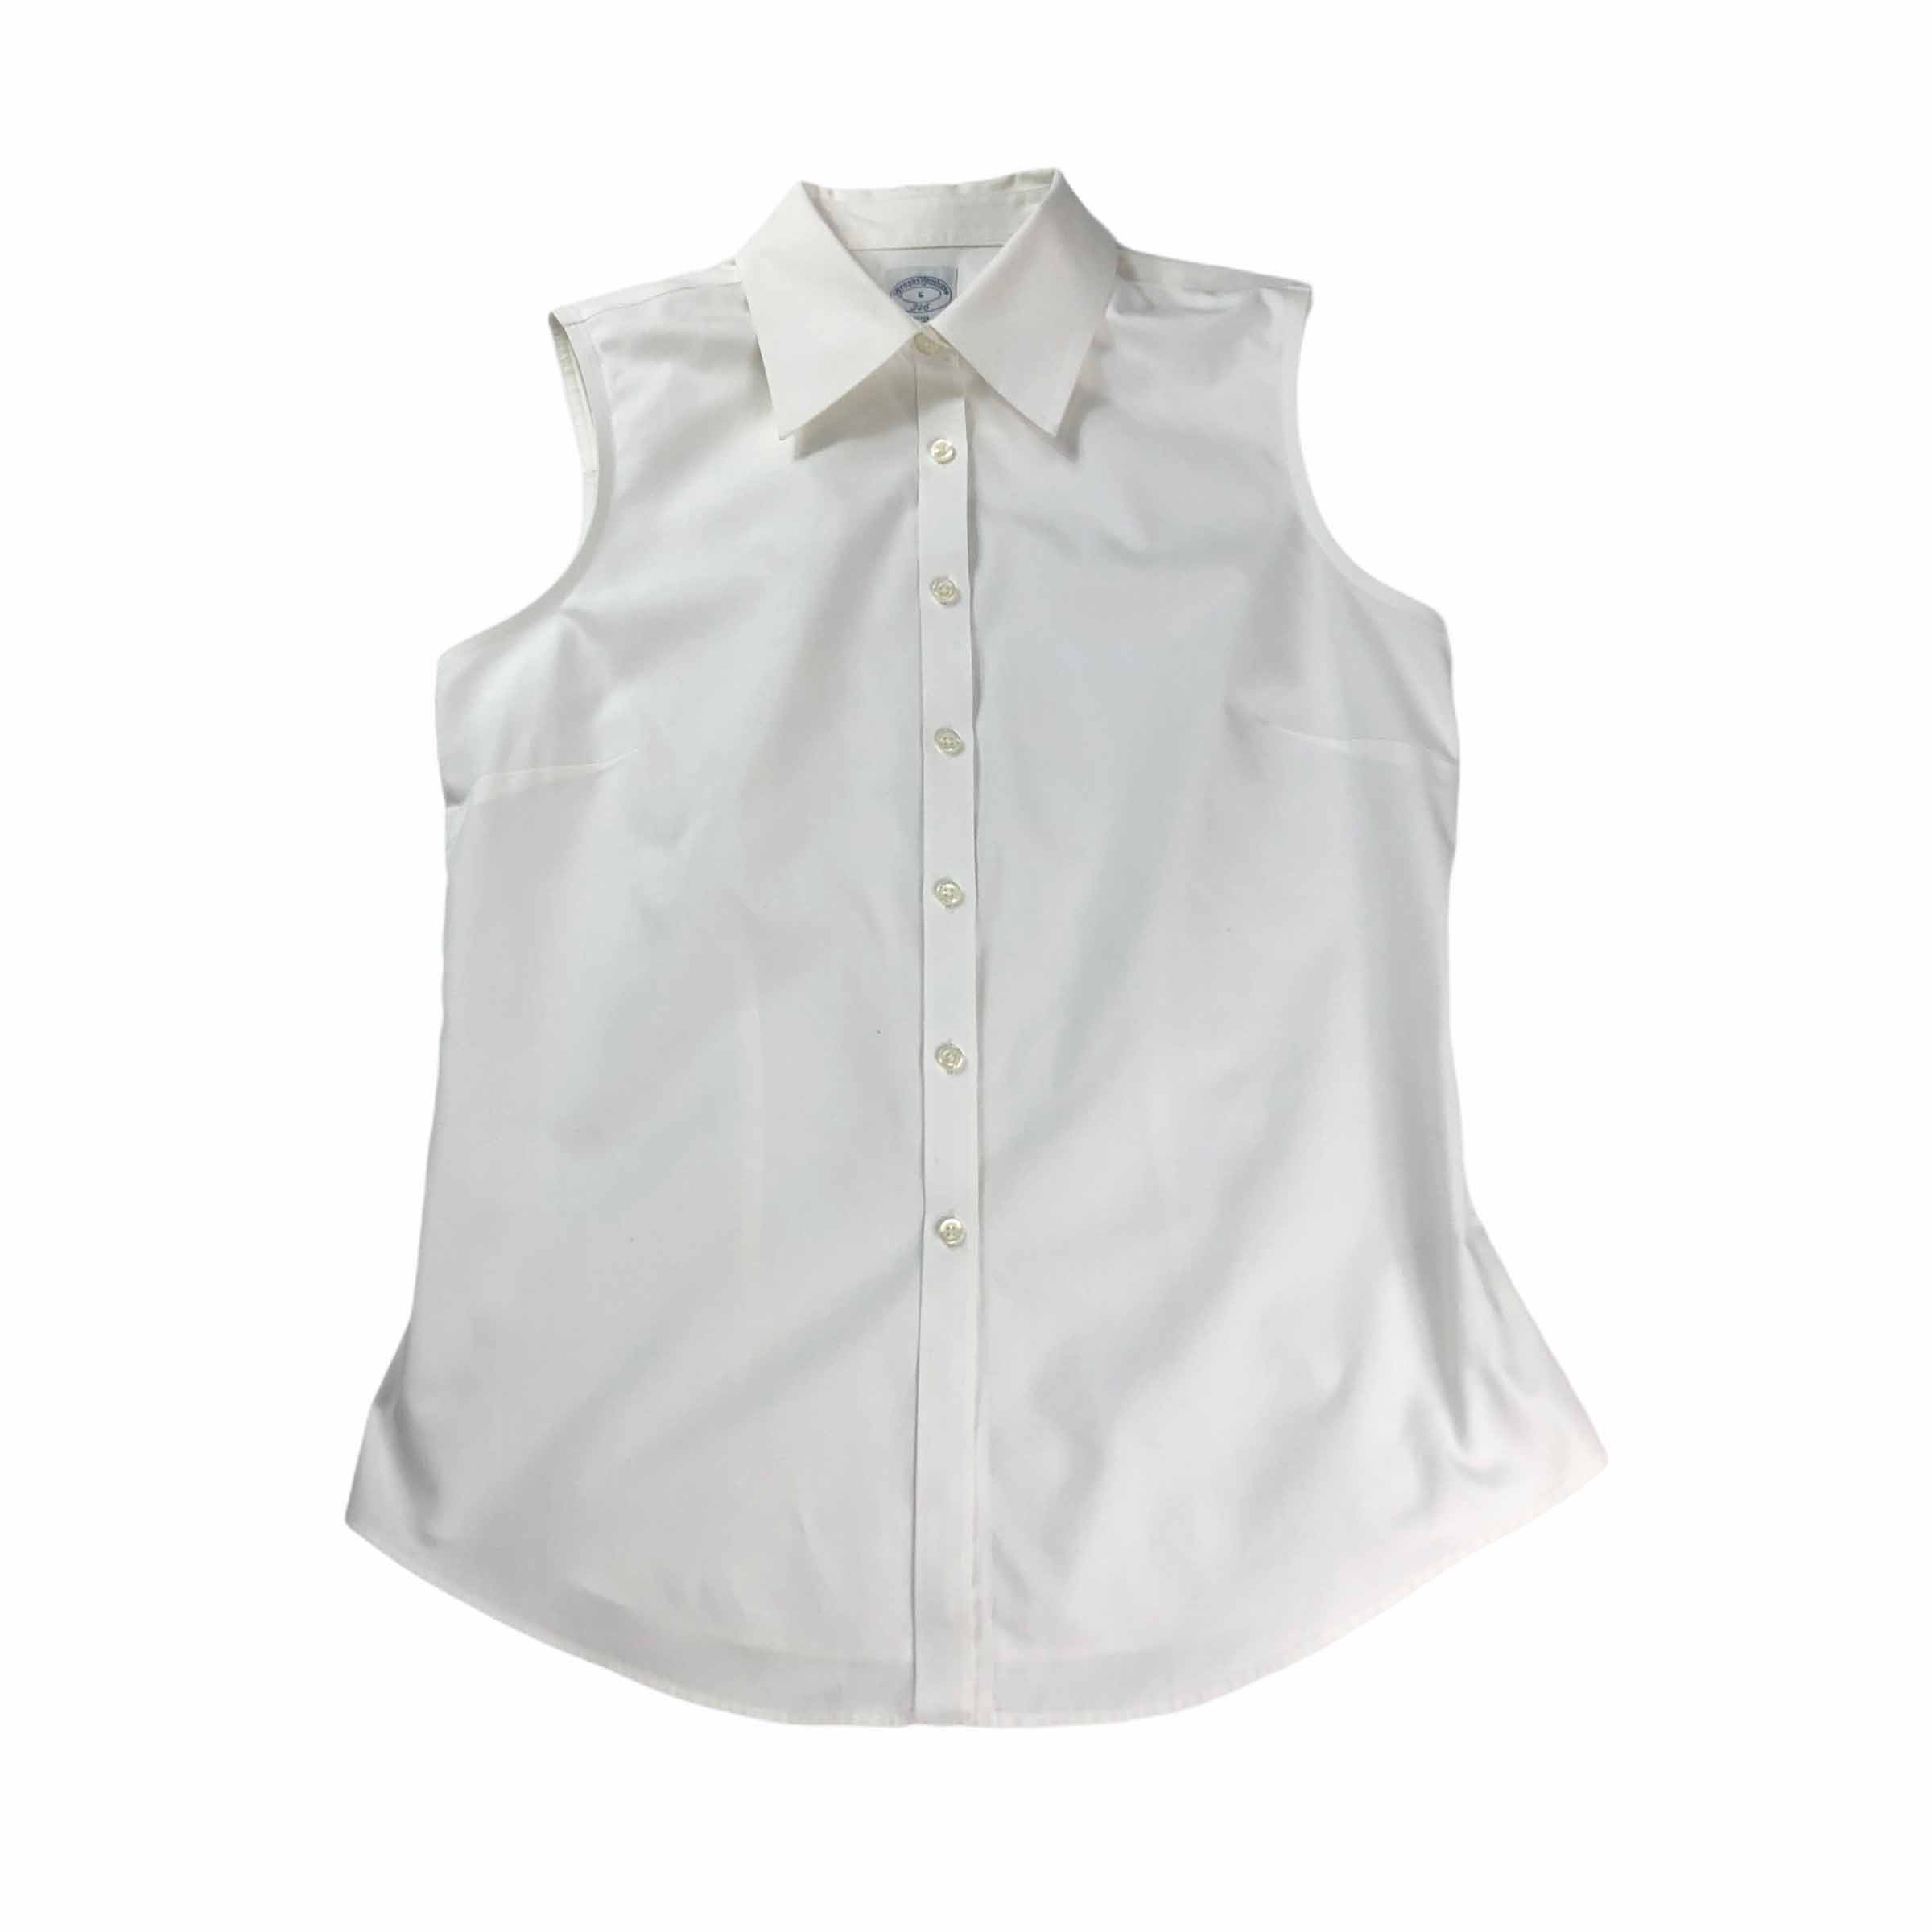 [Brooks Brothers] Non-Iron Fitted Sleeveless Dress Shirt - Size 6